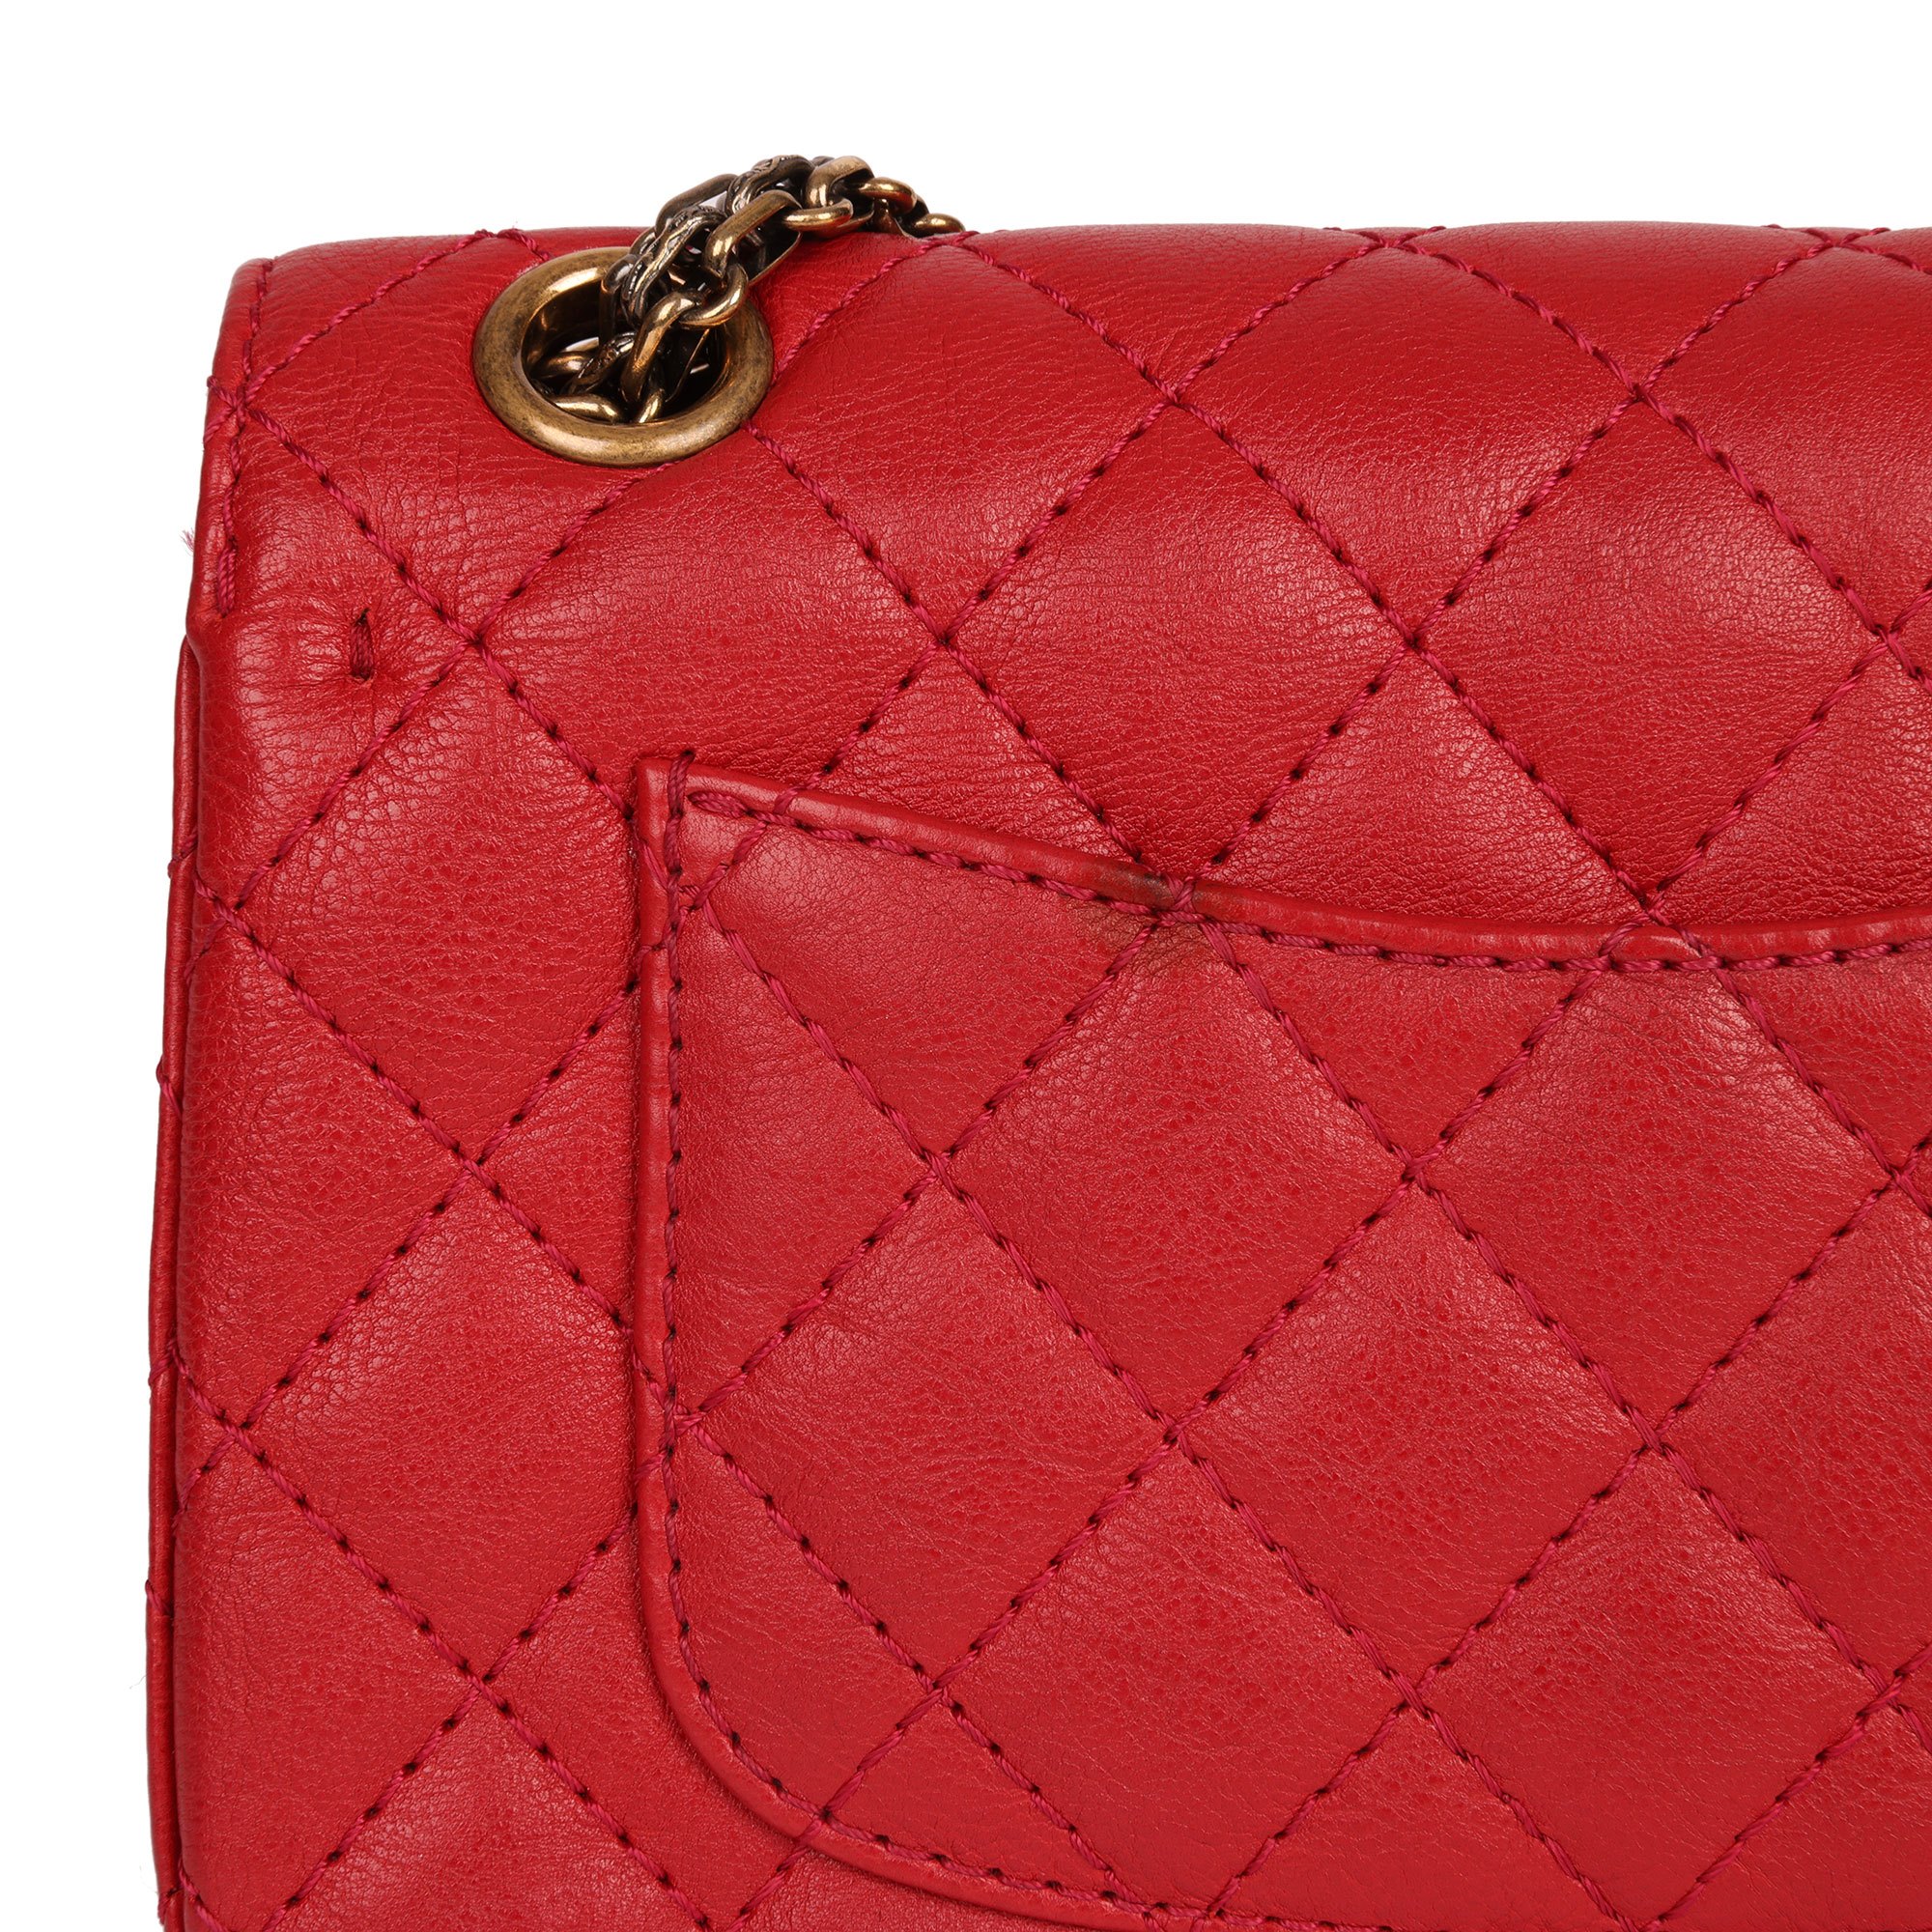 Chanel Red Quilted Calfskin Leather 2.55 Reissue 224 Double Flap Bag